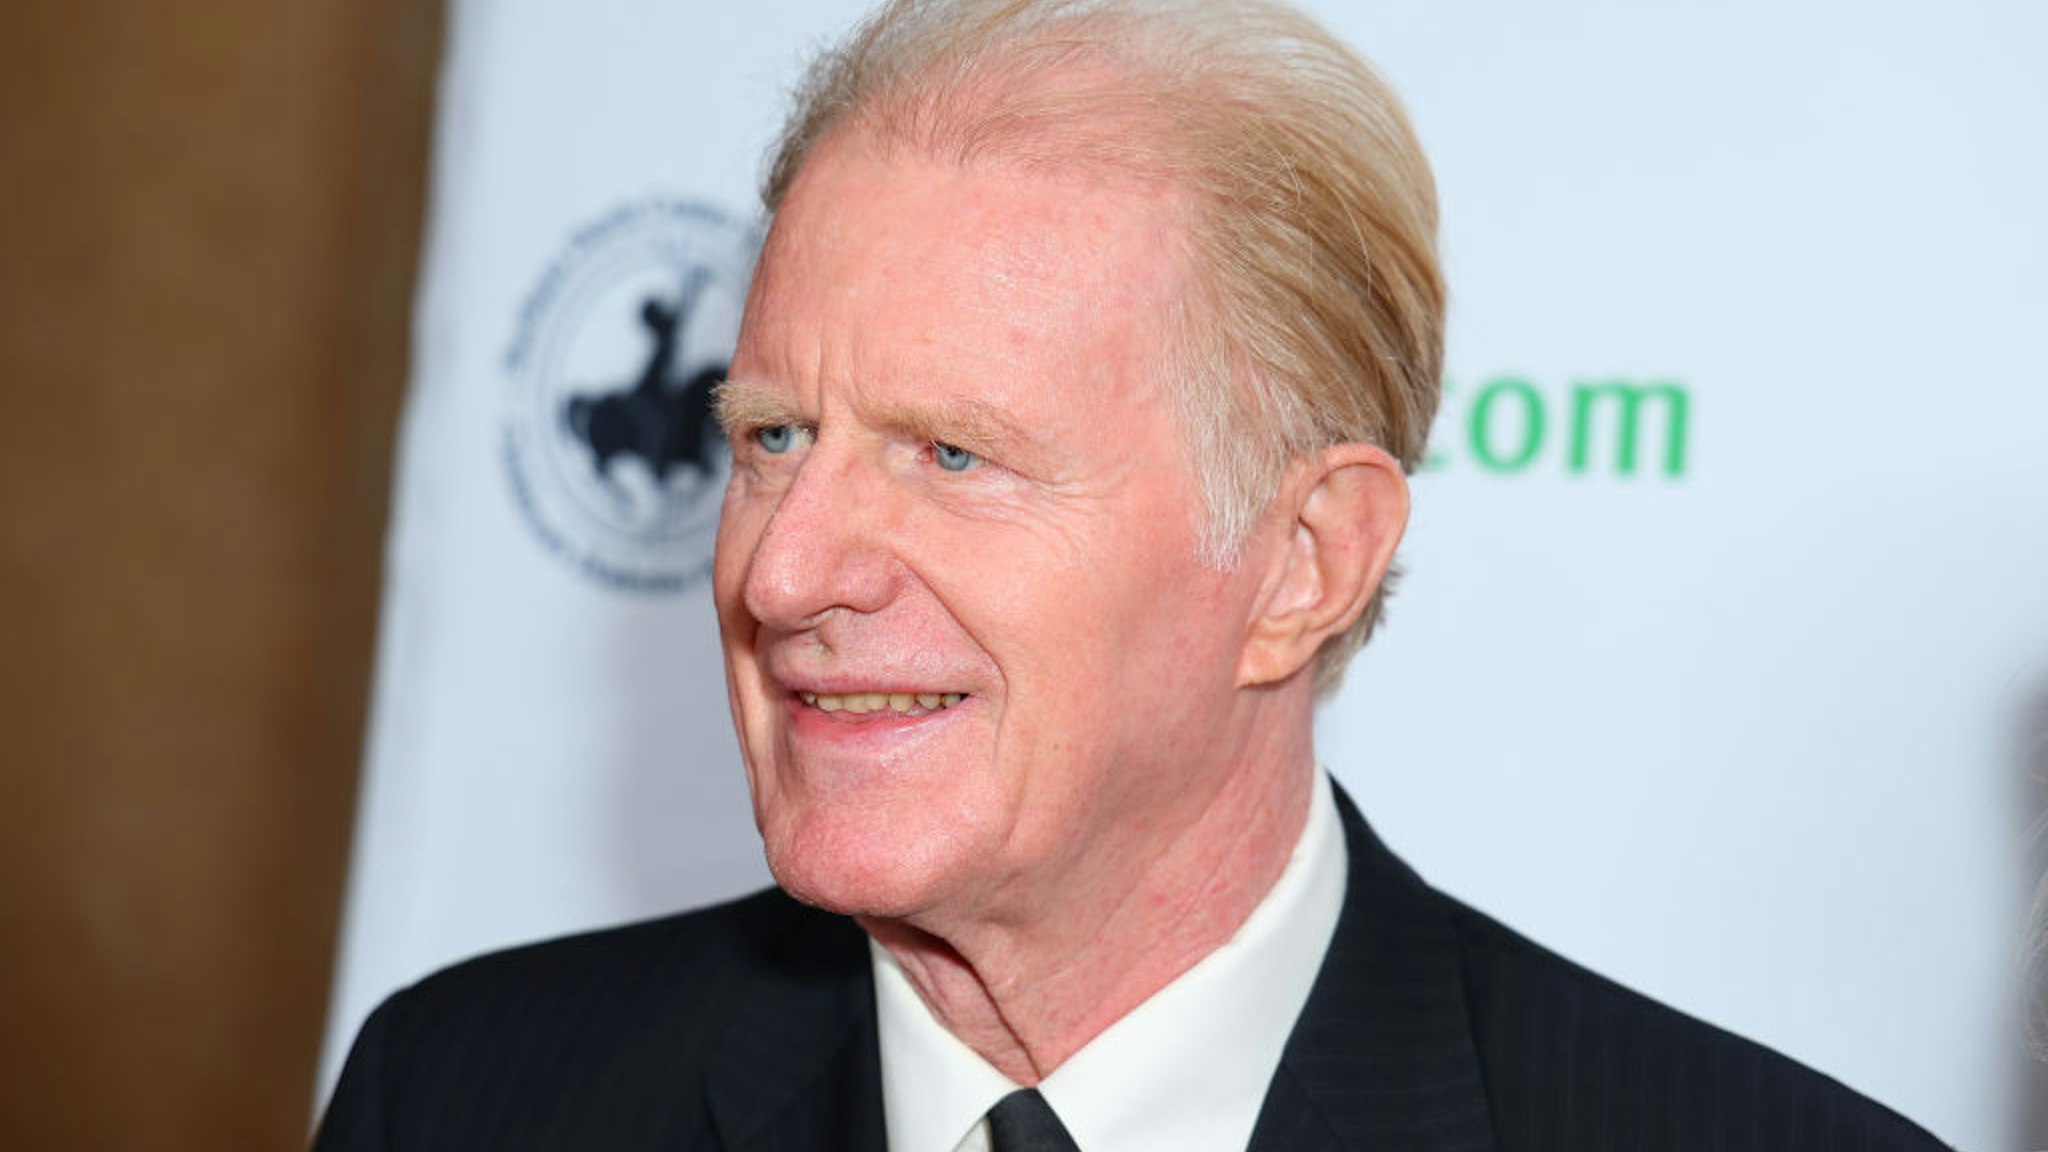 BEVERLY HILLS, CALIFORNIA - OCTOBER 08: Ed Begley Jr. attends the 36th Carousel of Hope Ball Honoring Diane Keaton at The Beverly Hilton on October 08, 2022 in Beverly Hills, California. (Photo by Leon Bennett/Getty Images)